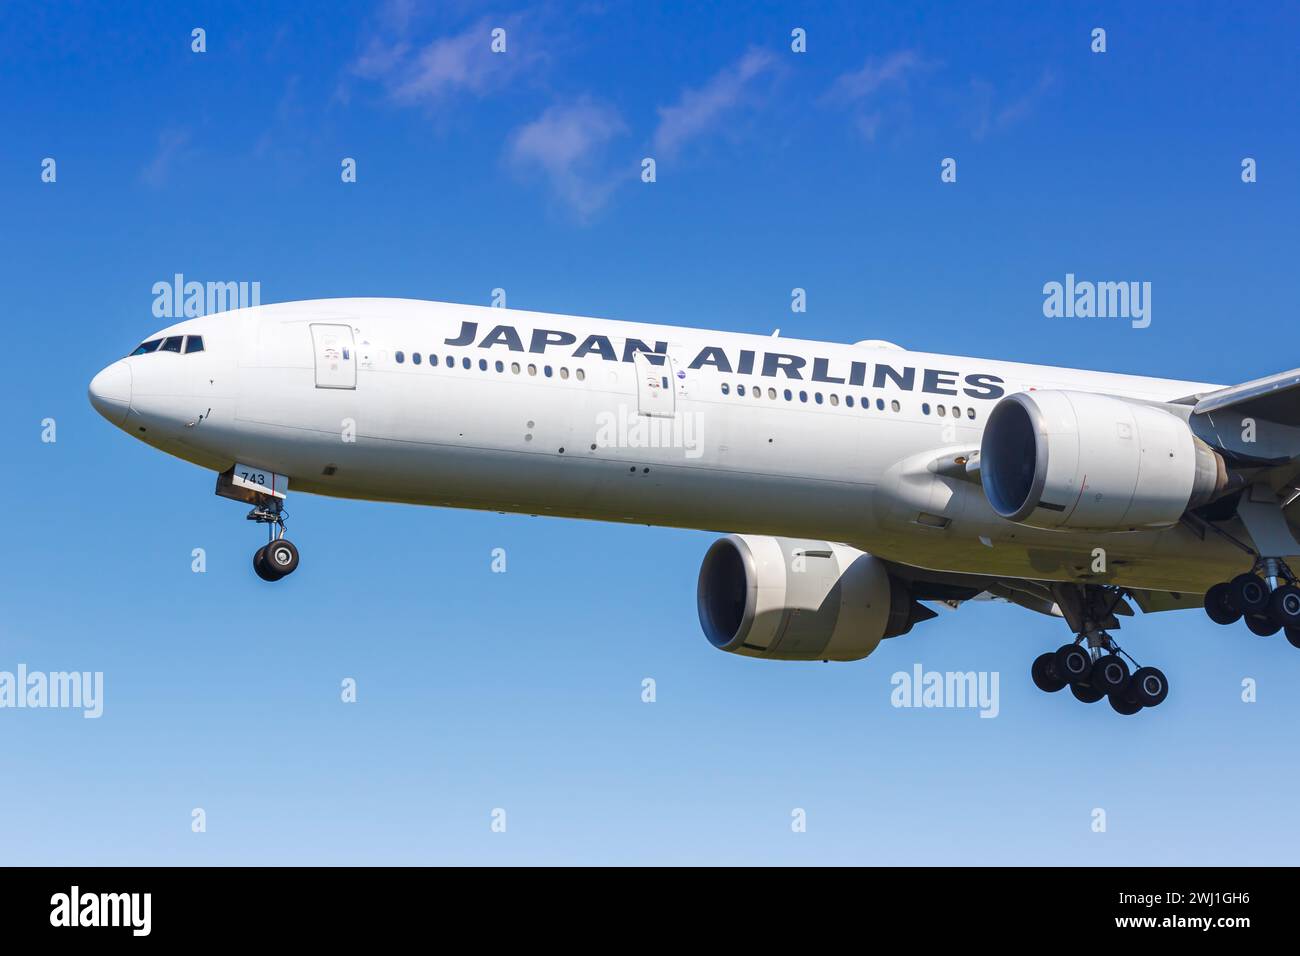 Japan Airlines Boeing 777-300ER aircraft New York JFK Airport in the USA Stock Photo